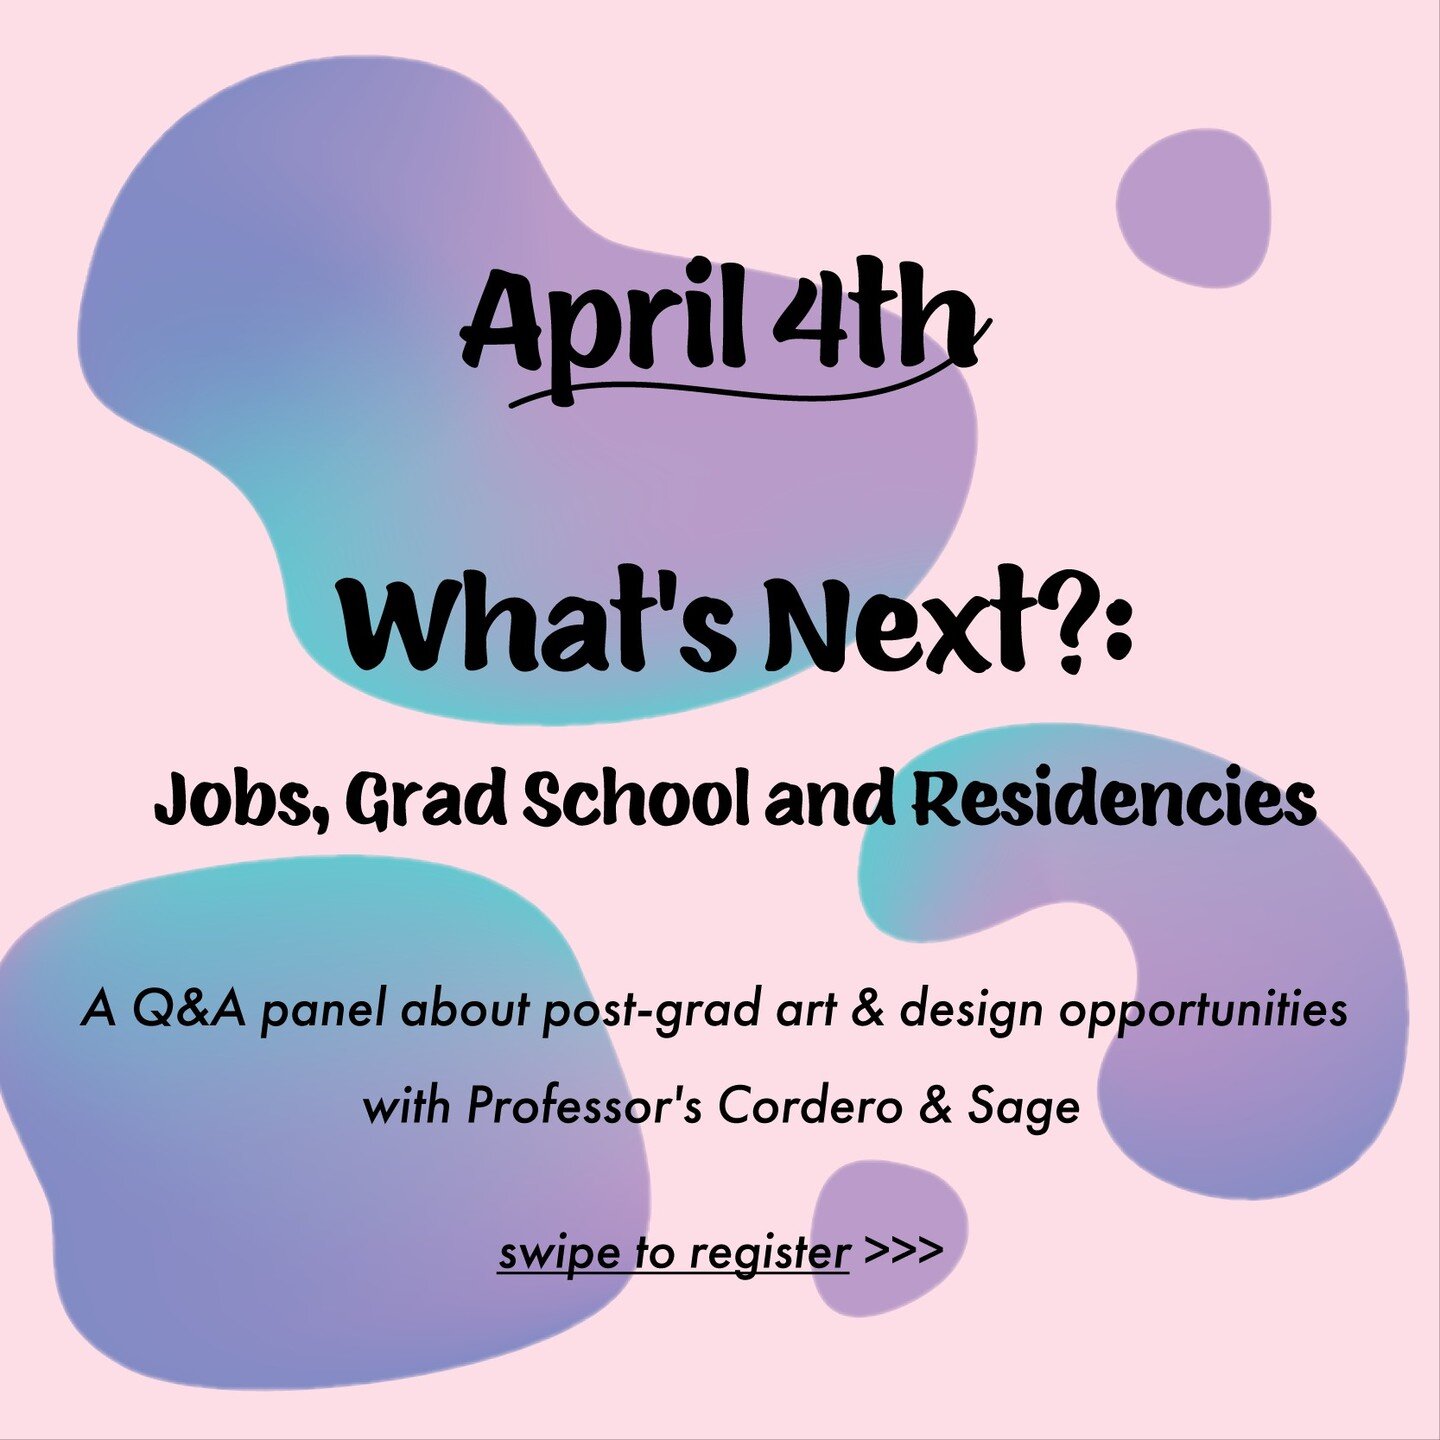 Are you interested in jobs, grad school or residencies? Then join Professor Cordero and Sage for art &amp; design opportunities!

RSVP needed with the QR code!
Time: April 4th 1:50 pm - 3:30 pm
Location: Meiley Swallow Lab 110